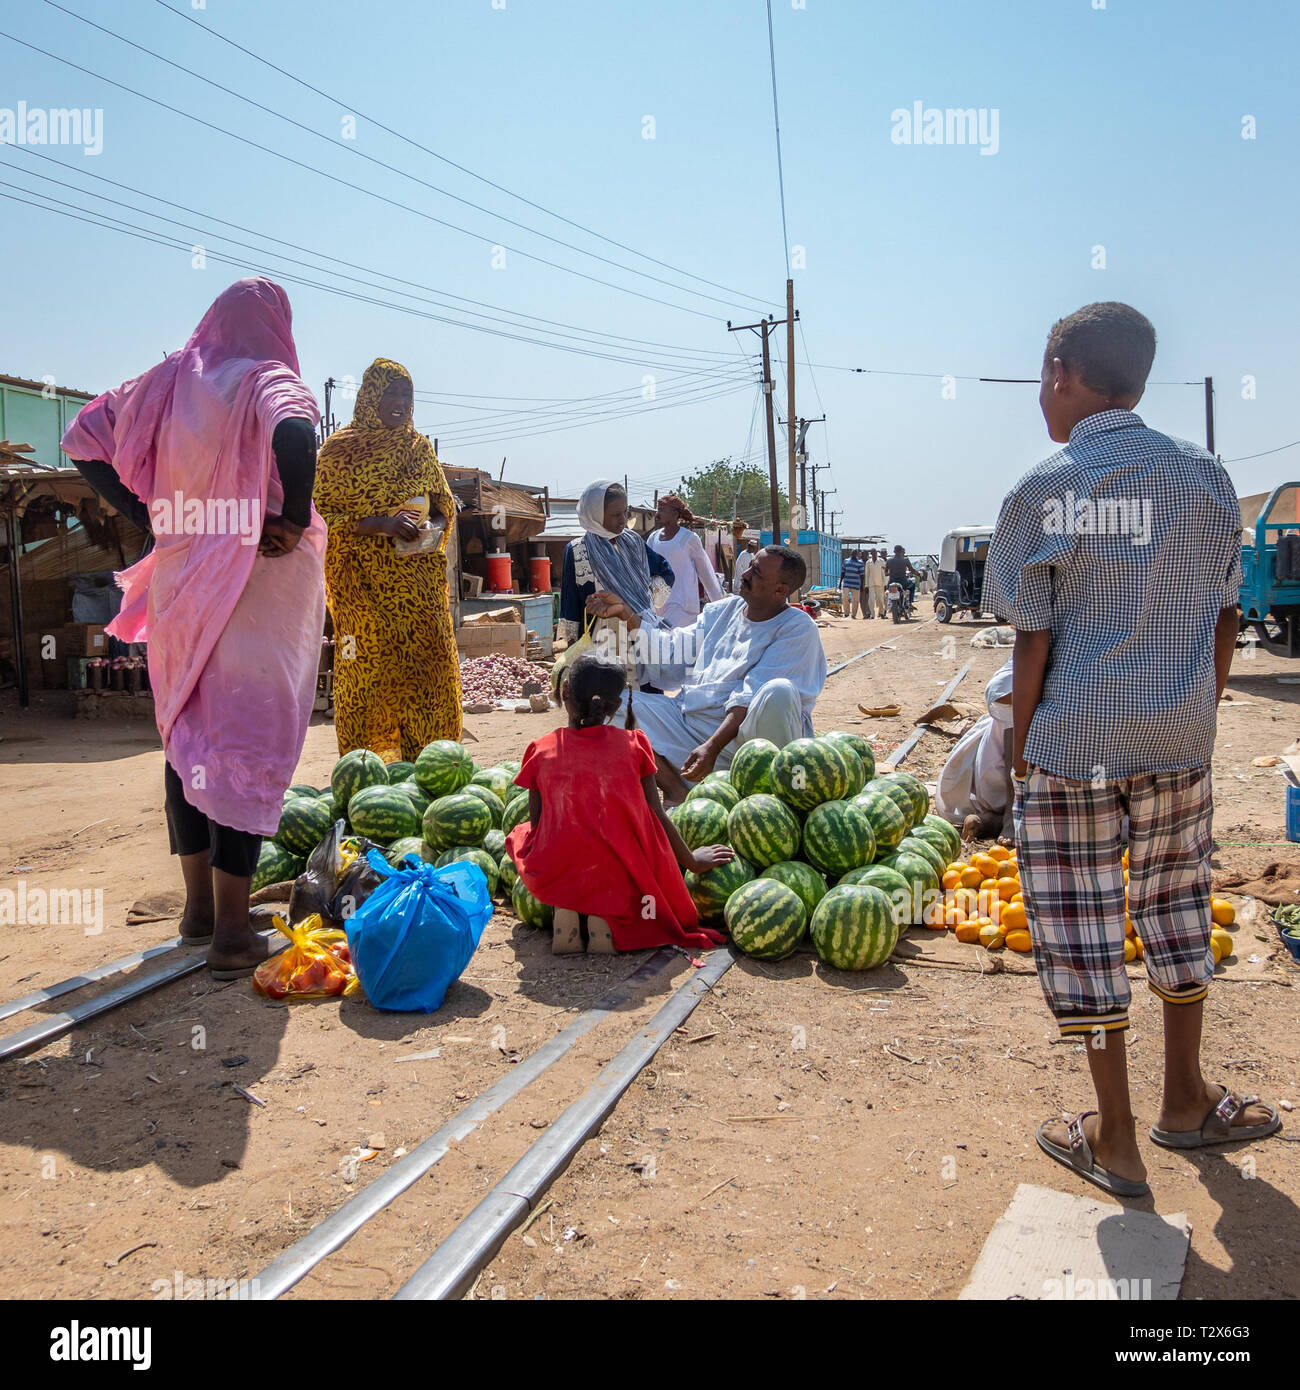 Nuri, Sudan, February 9., 2019: Market stall in Sudan with watermelons, with a woman in a blue skirt, a woman with trousers, a little young girl with  Stock Photo